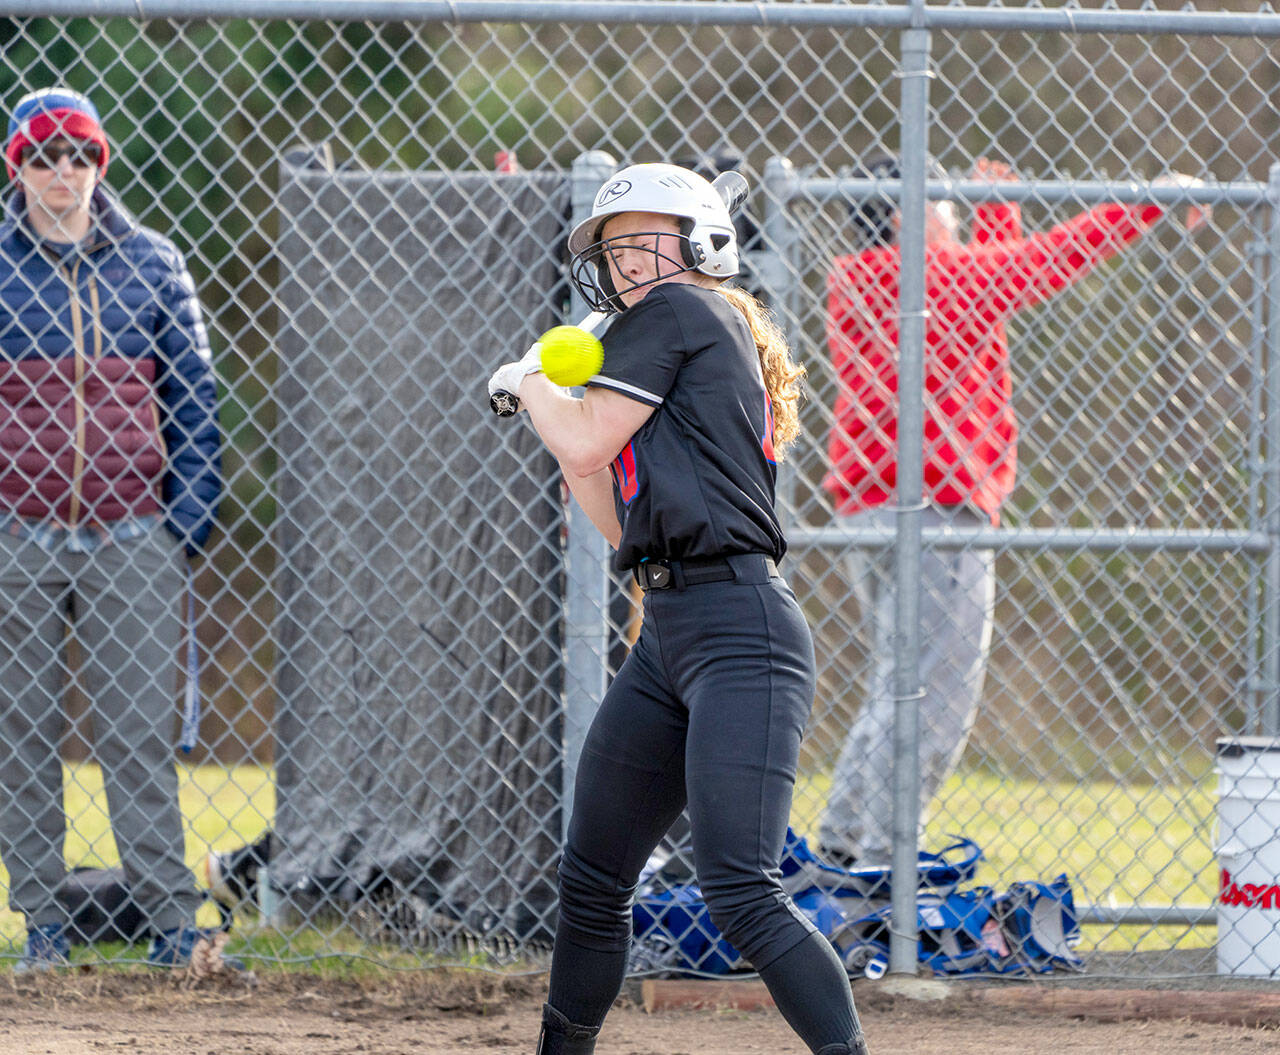 East Jefferson Rivals’ catcher Breanne Huntingford gets a walk to first base after being tagged by the ball while at bat during a game against the Bremerton Knights played at Blue Heron Middle School in Port Townsend on Wednesday. (Steve Mullensky/for Peninsula Daily News)